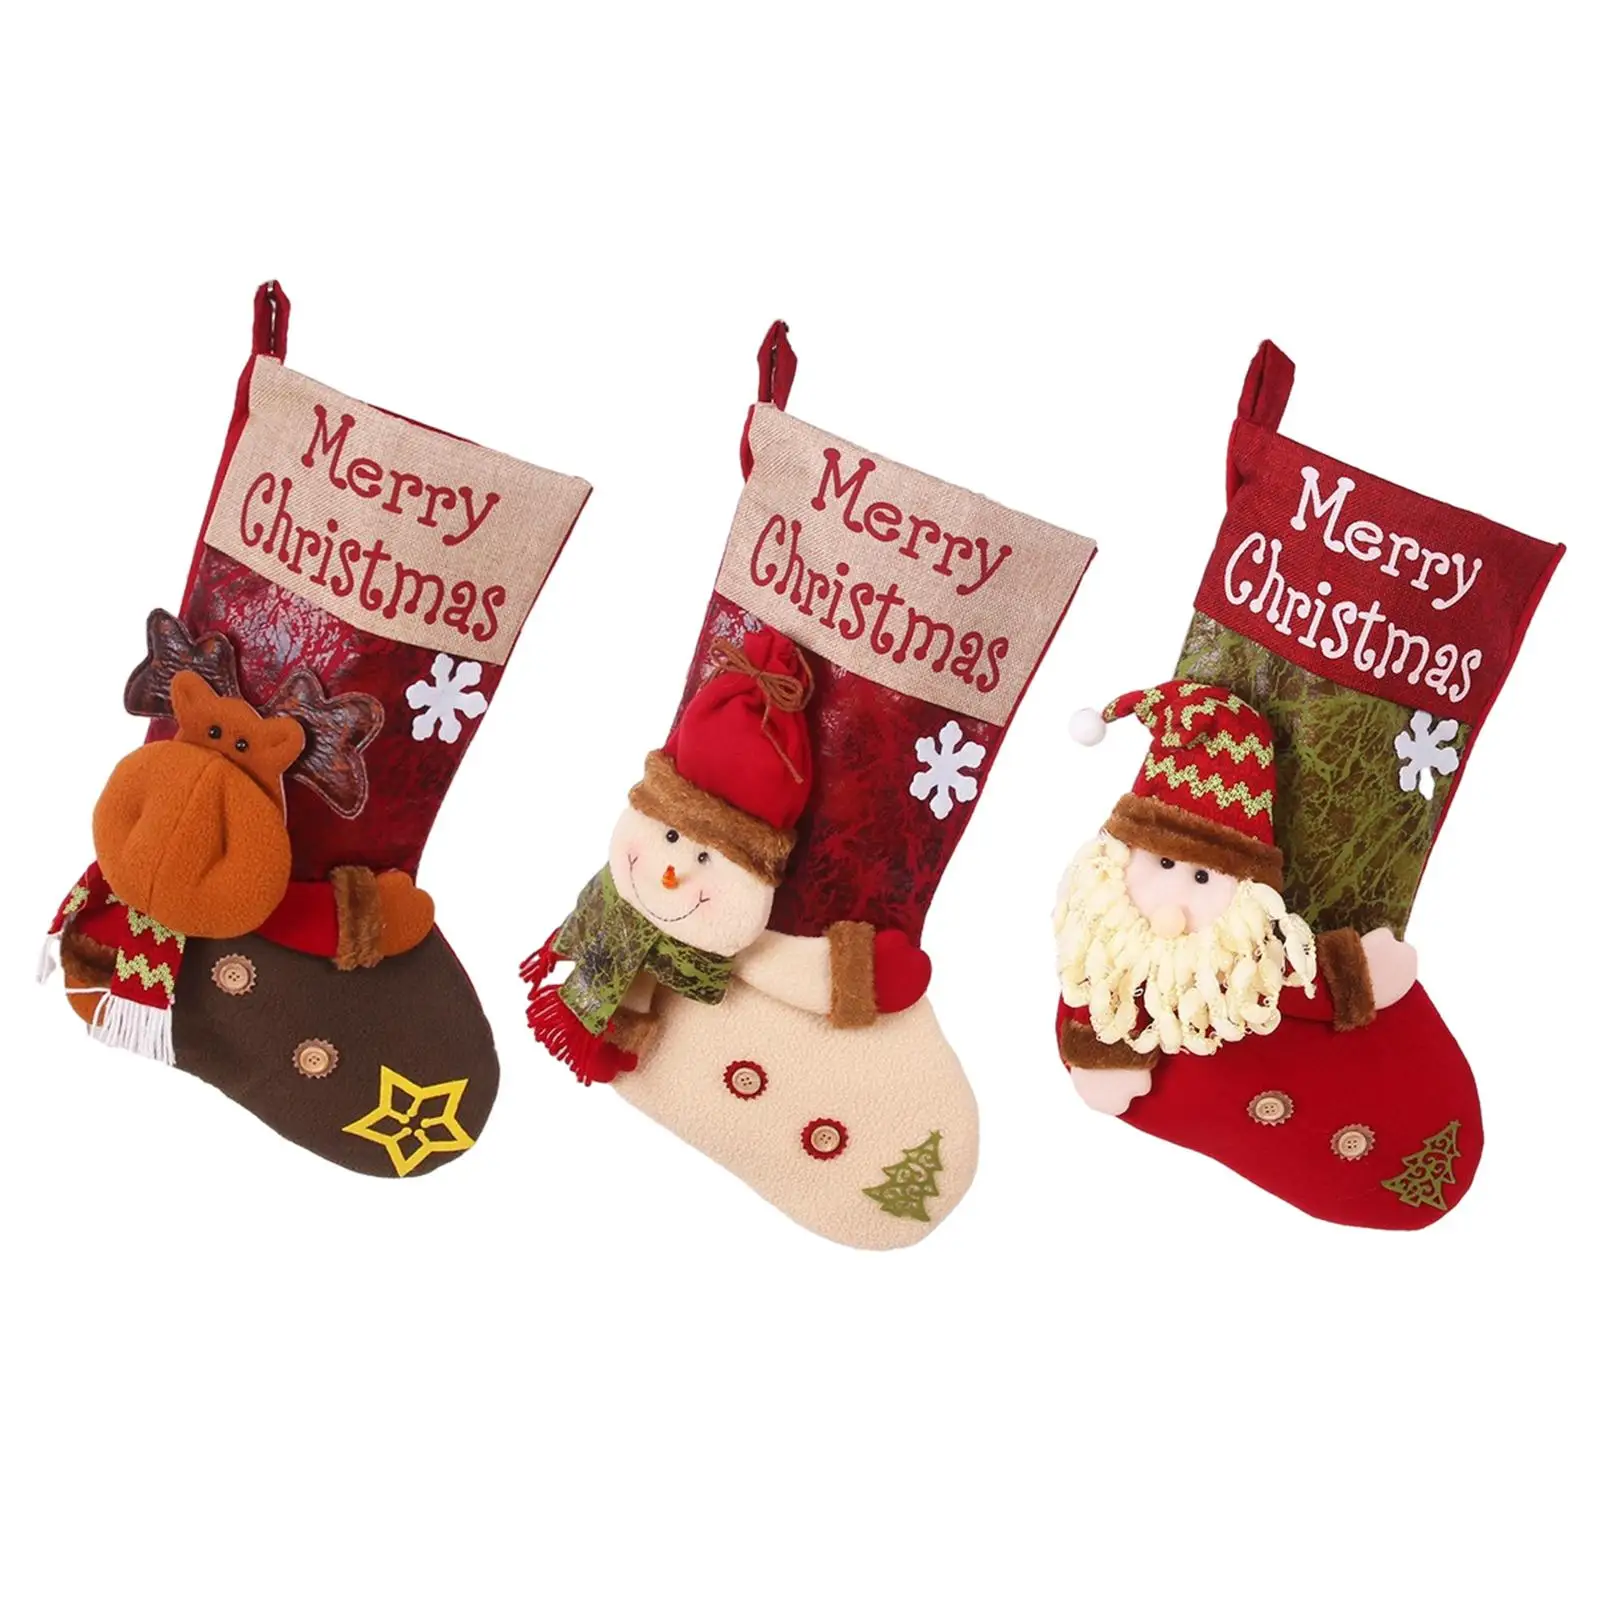 3D Socks Gift Bags Big Xmas Stockings Decoration Holiday Party Decoration Portable Holiday Stockings Xmas Stockings for Home